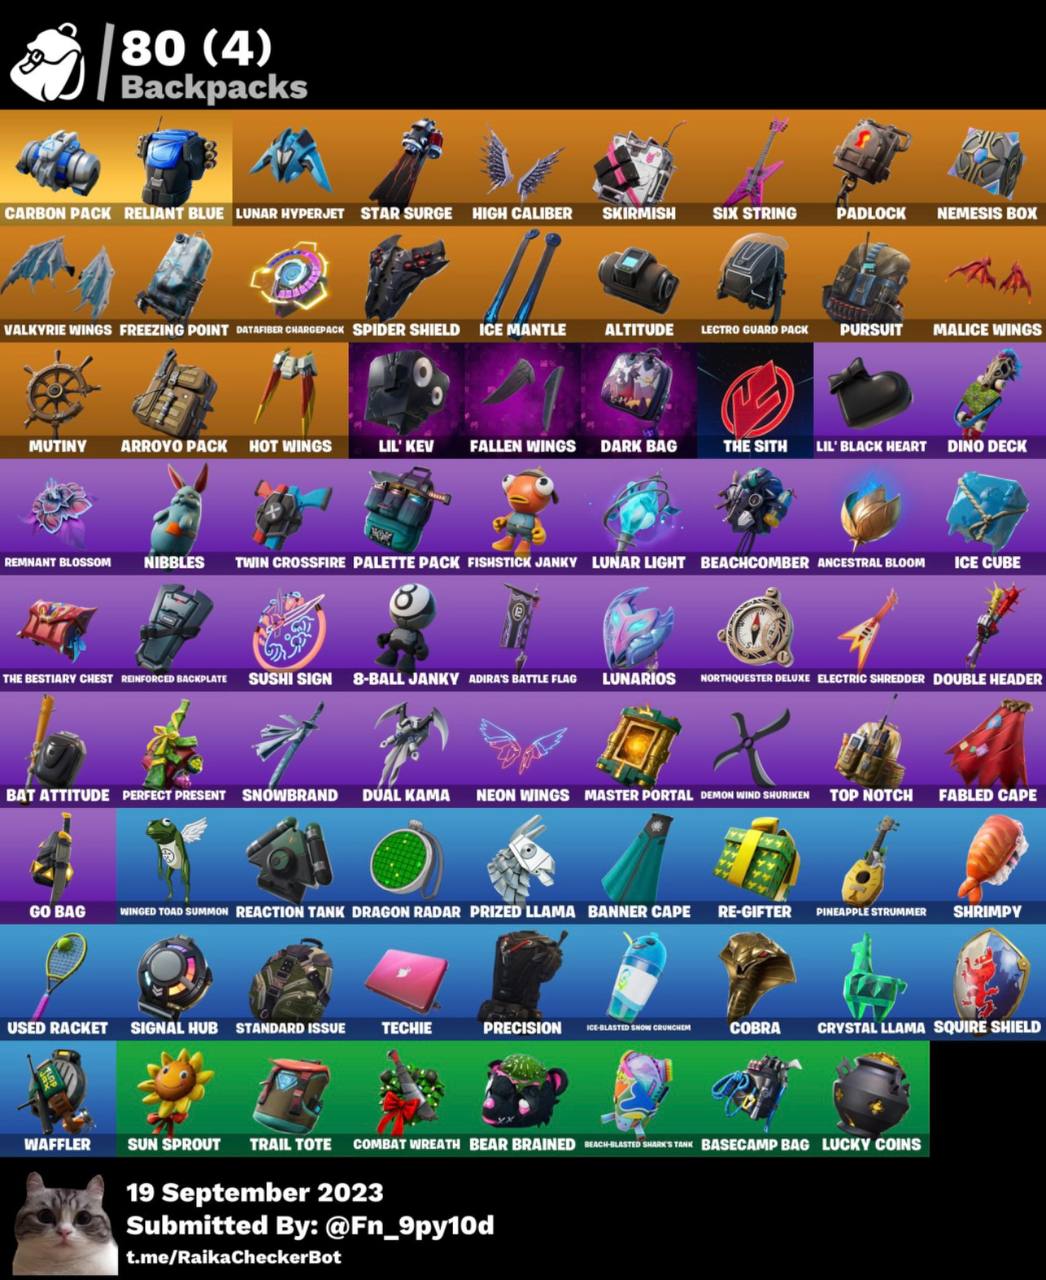 OG GHOUL TROOPER / BLUE SQUIRE /  MERRY MINT AXE / TRILOGY / CARBON COMMANDO / MAKO / BANNER ICON